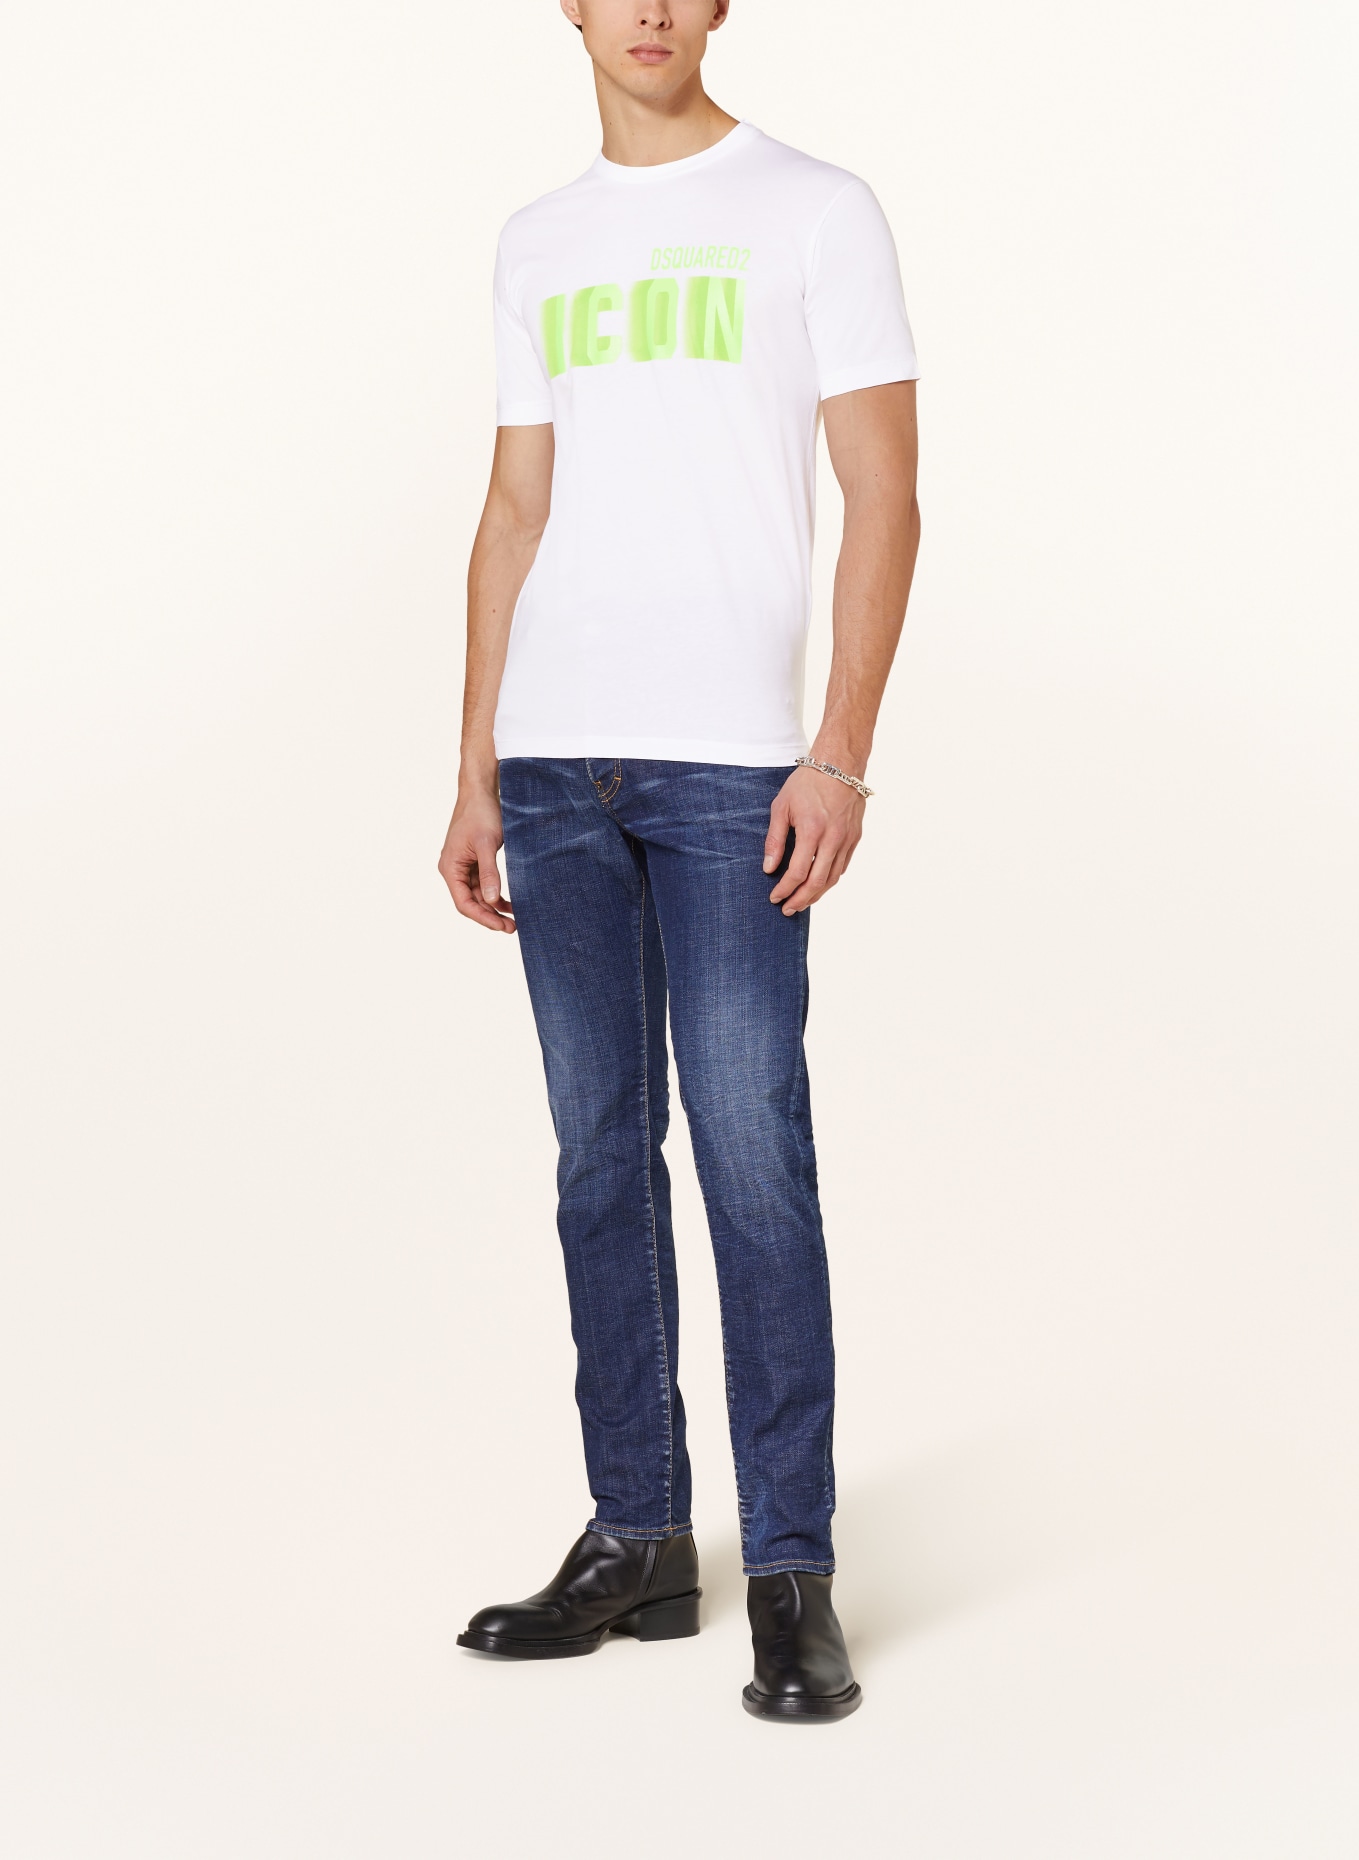 DSQUARED2 T-shirt ICON, Color: WHITE/ NEON GREEN (Image 2)